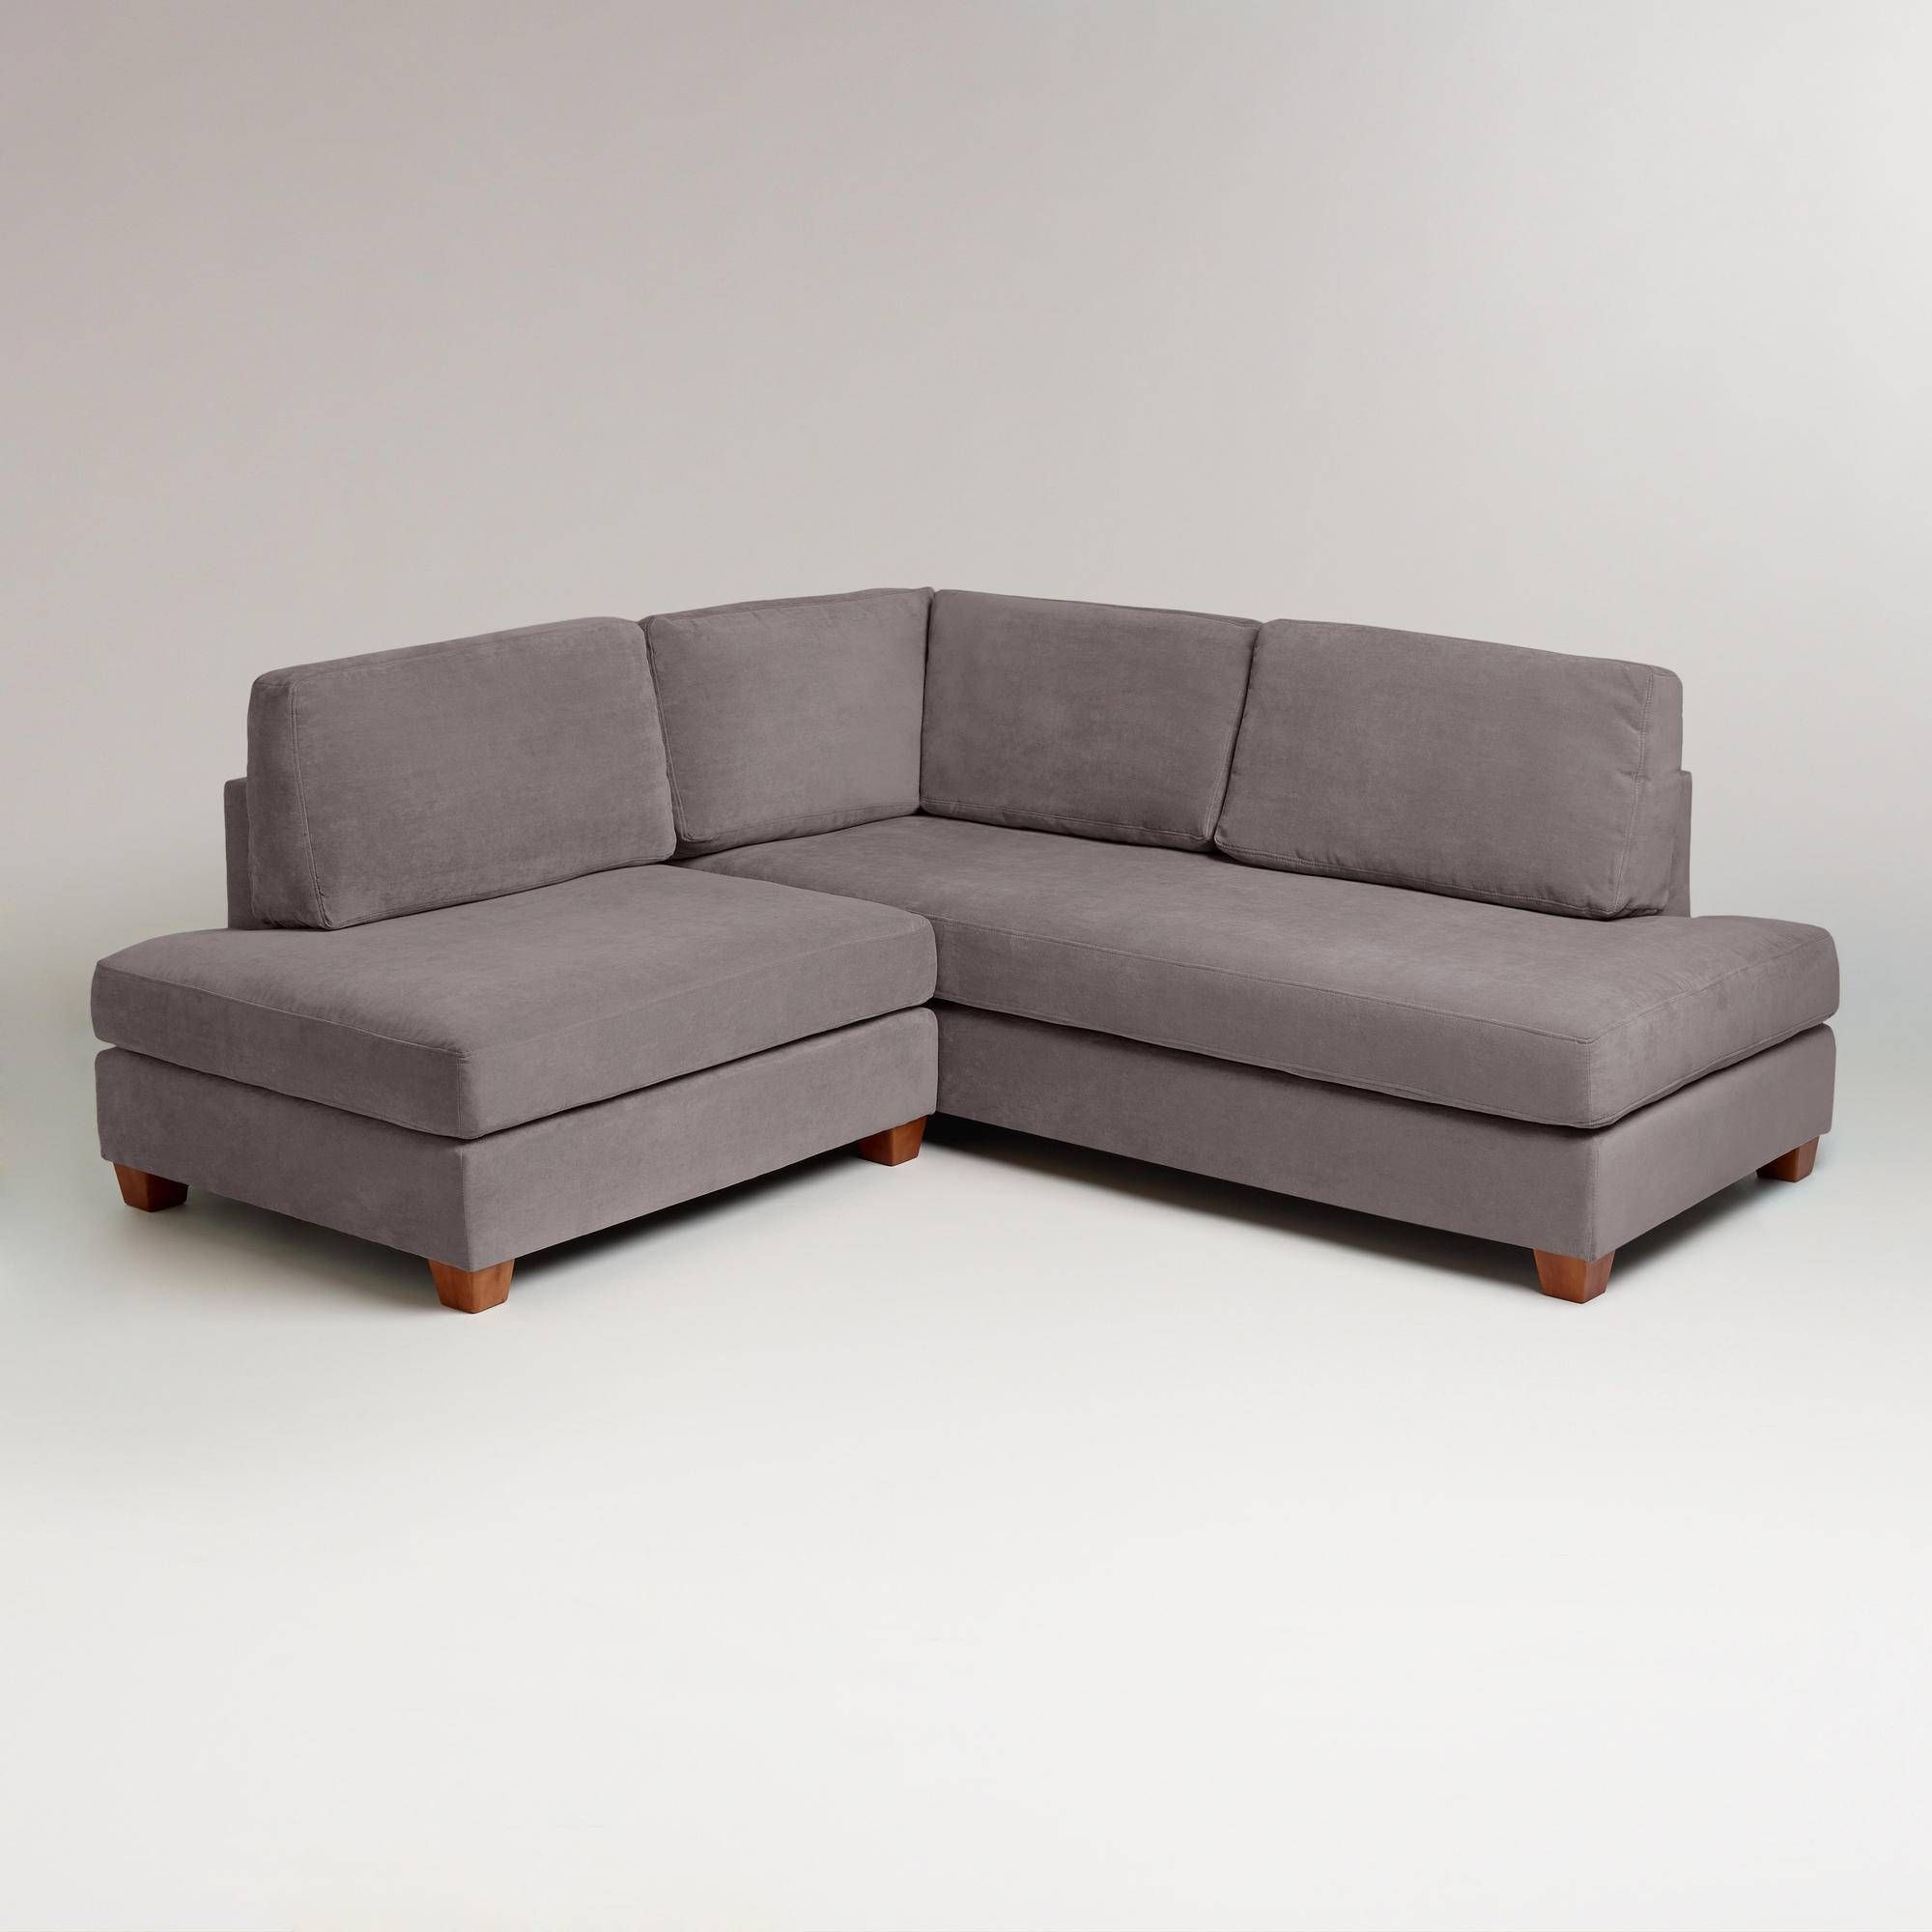 Good Wyatt Sectional Sofa 79 In Down Filled Sofas And Sectionals For Down Filled Sofas And Sectionals (View 28 of 30)